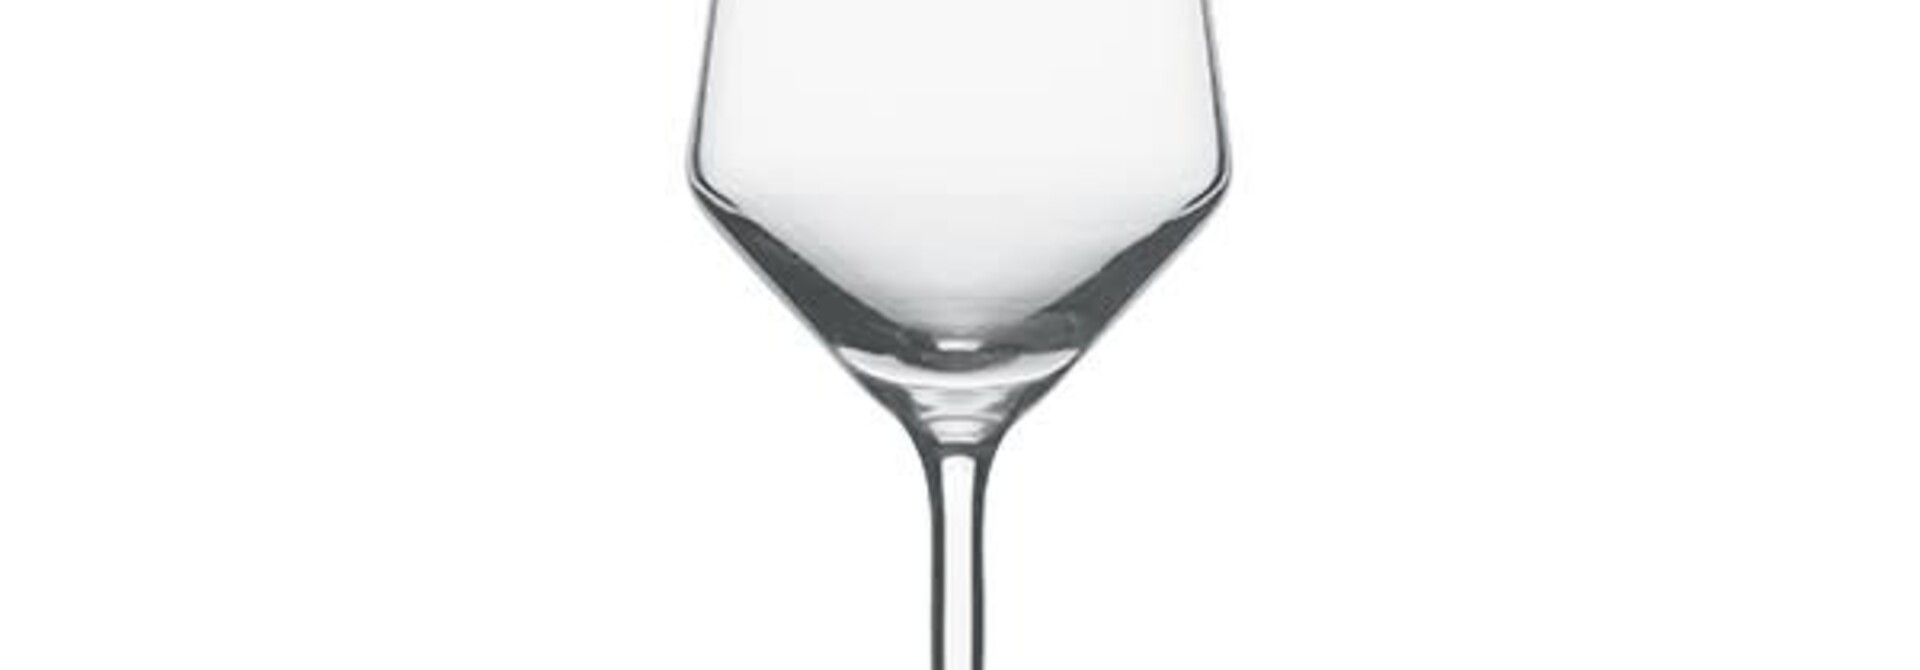 Riesling | The EOD Signature Collection, Wine Glass - 10.1 Oz